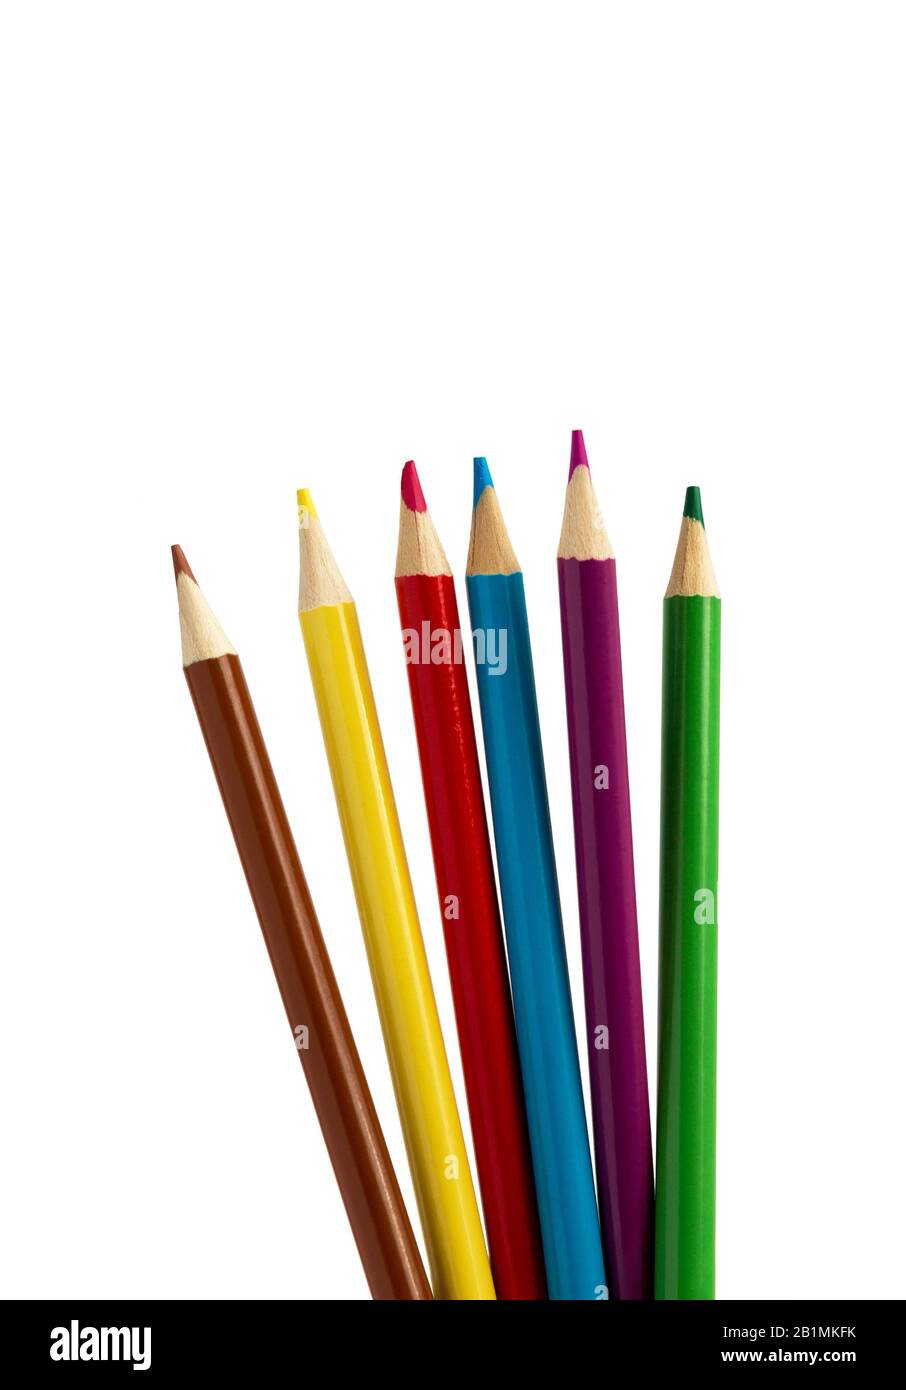 Pencil color isolated on white background. Colorful, colored pencil. Close up of vibrant pencil color tips. Stock Photo